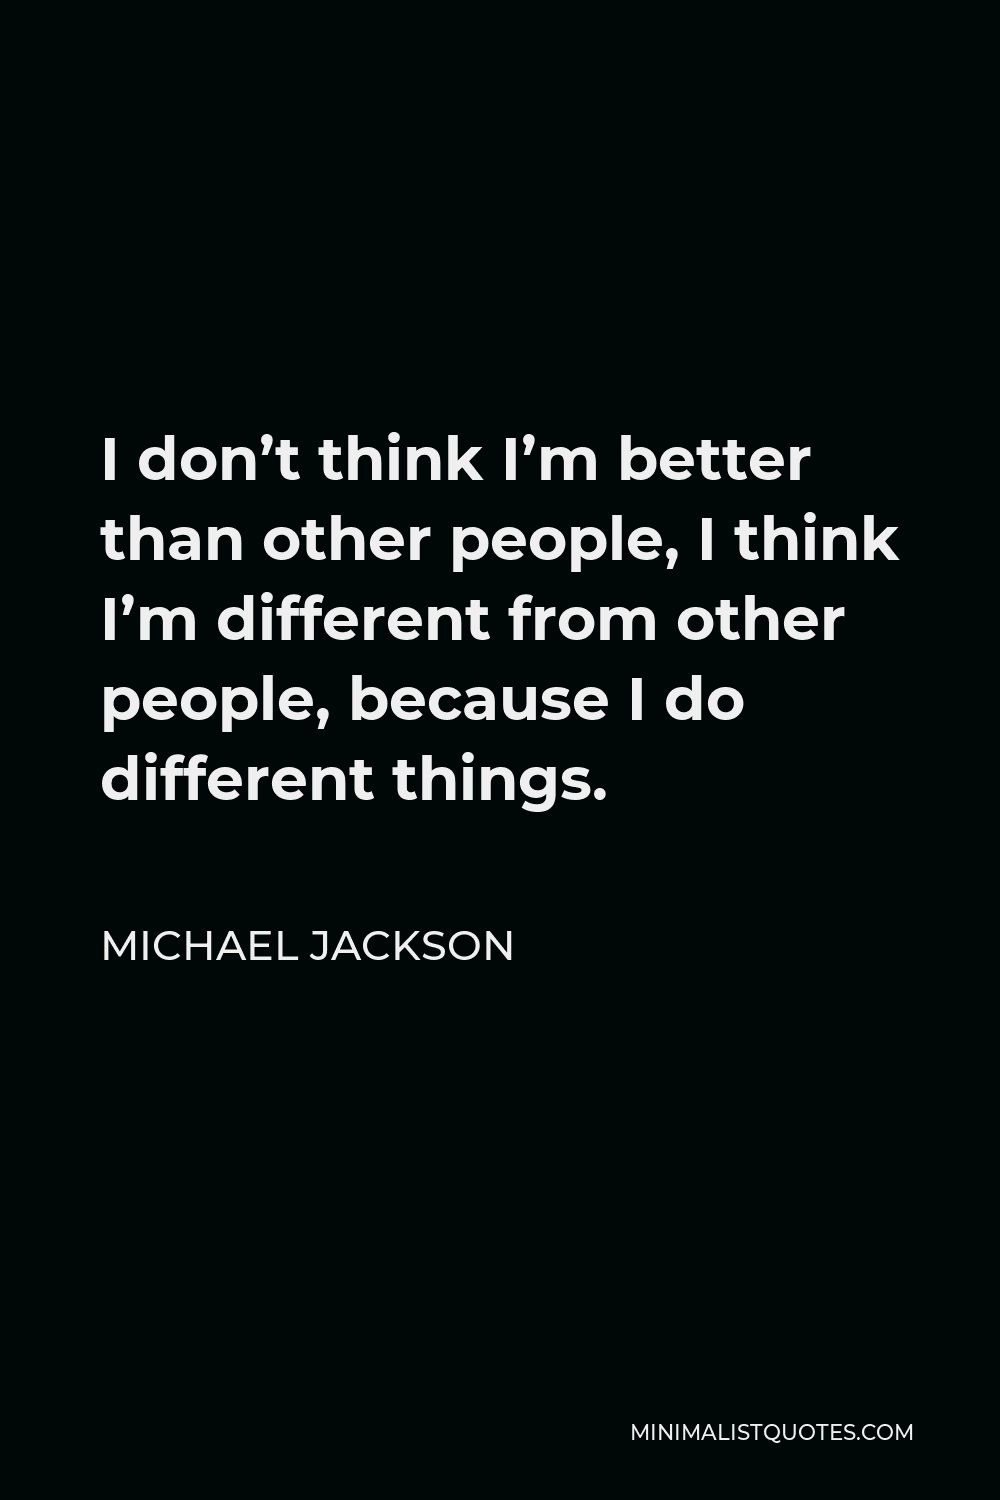 Michael Jackson Quote - I don’t think I’m better than other people, I think I’m different from other people, because I do different things.